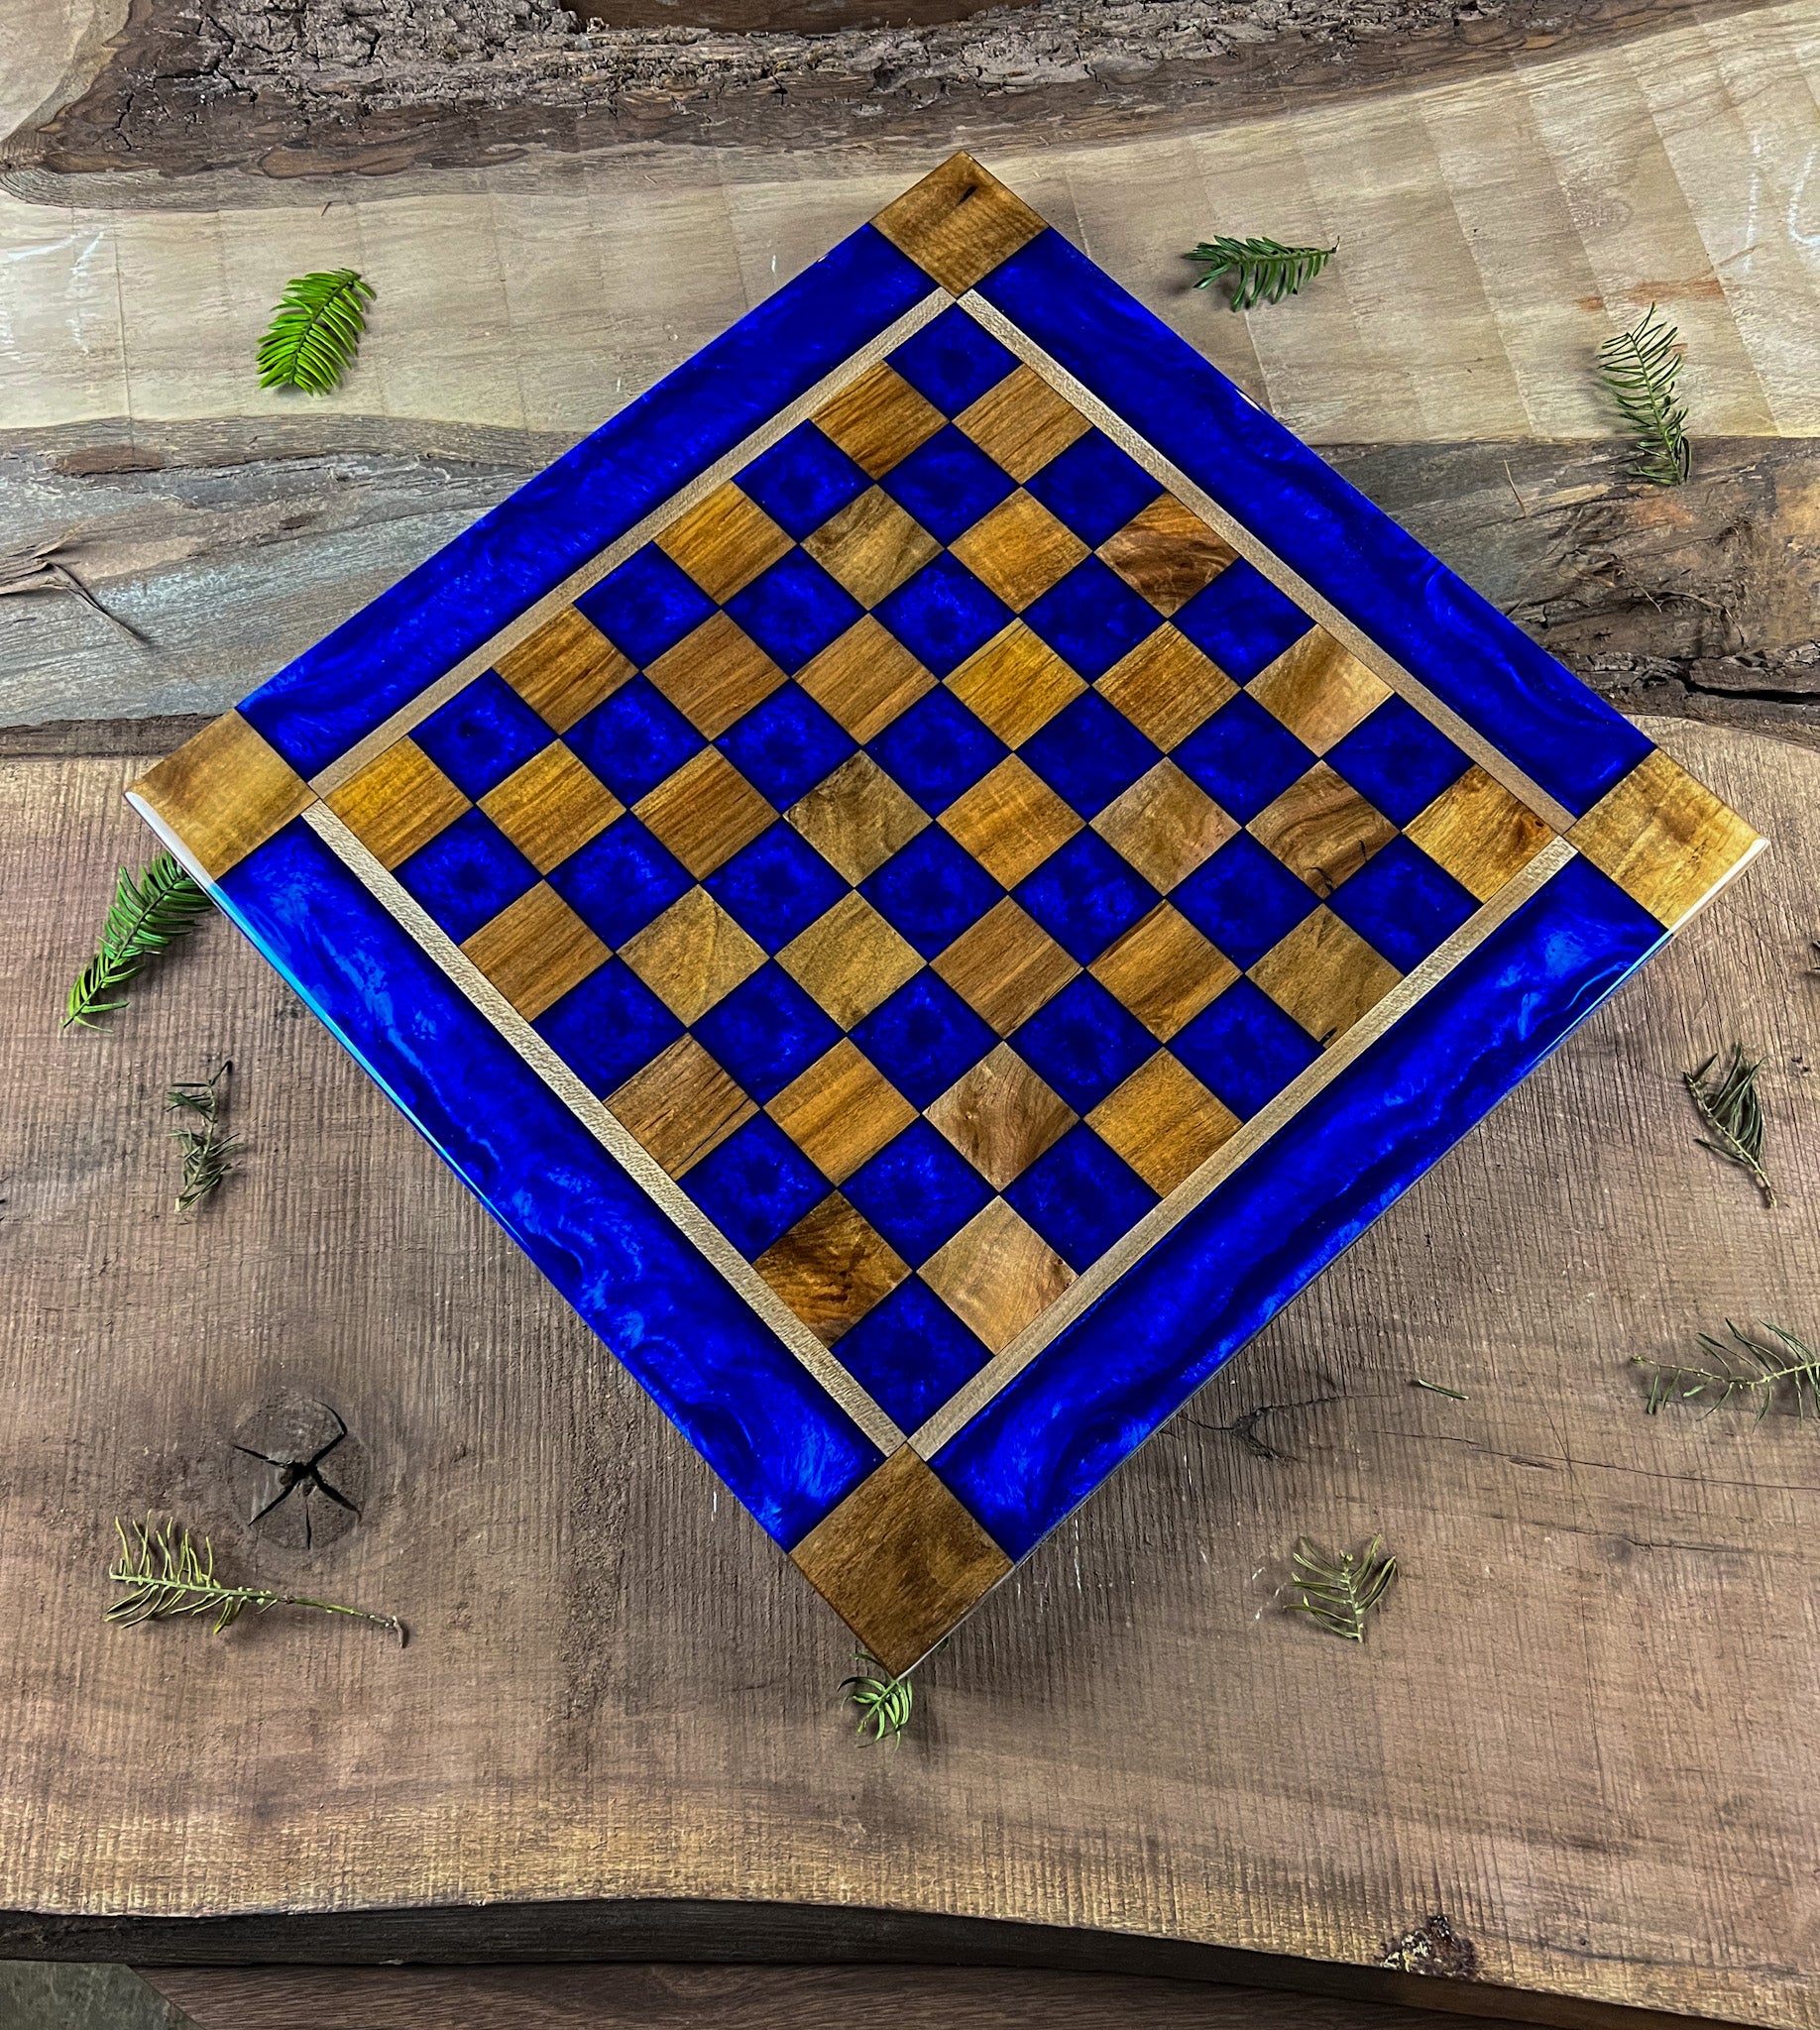 Deep Blue Maple Wood Chess Board (With Border)